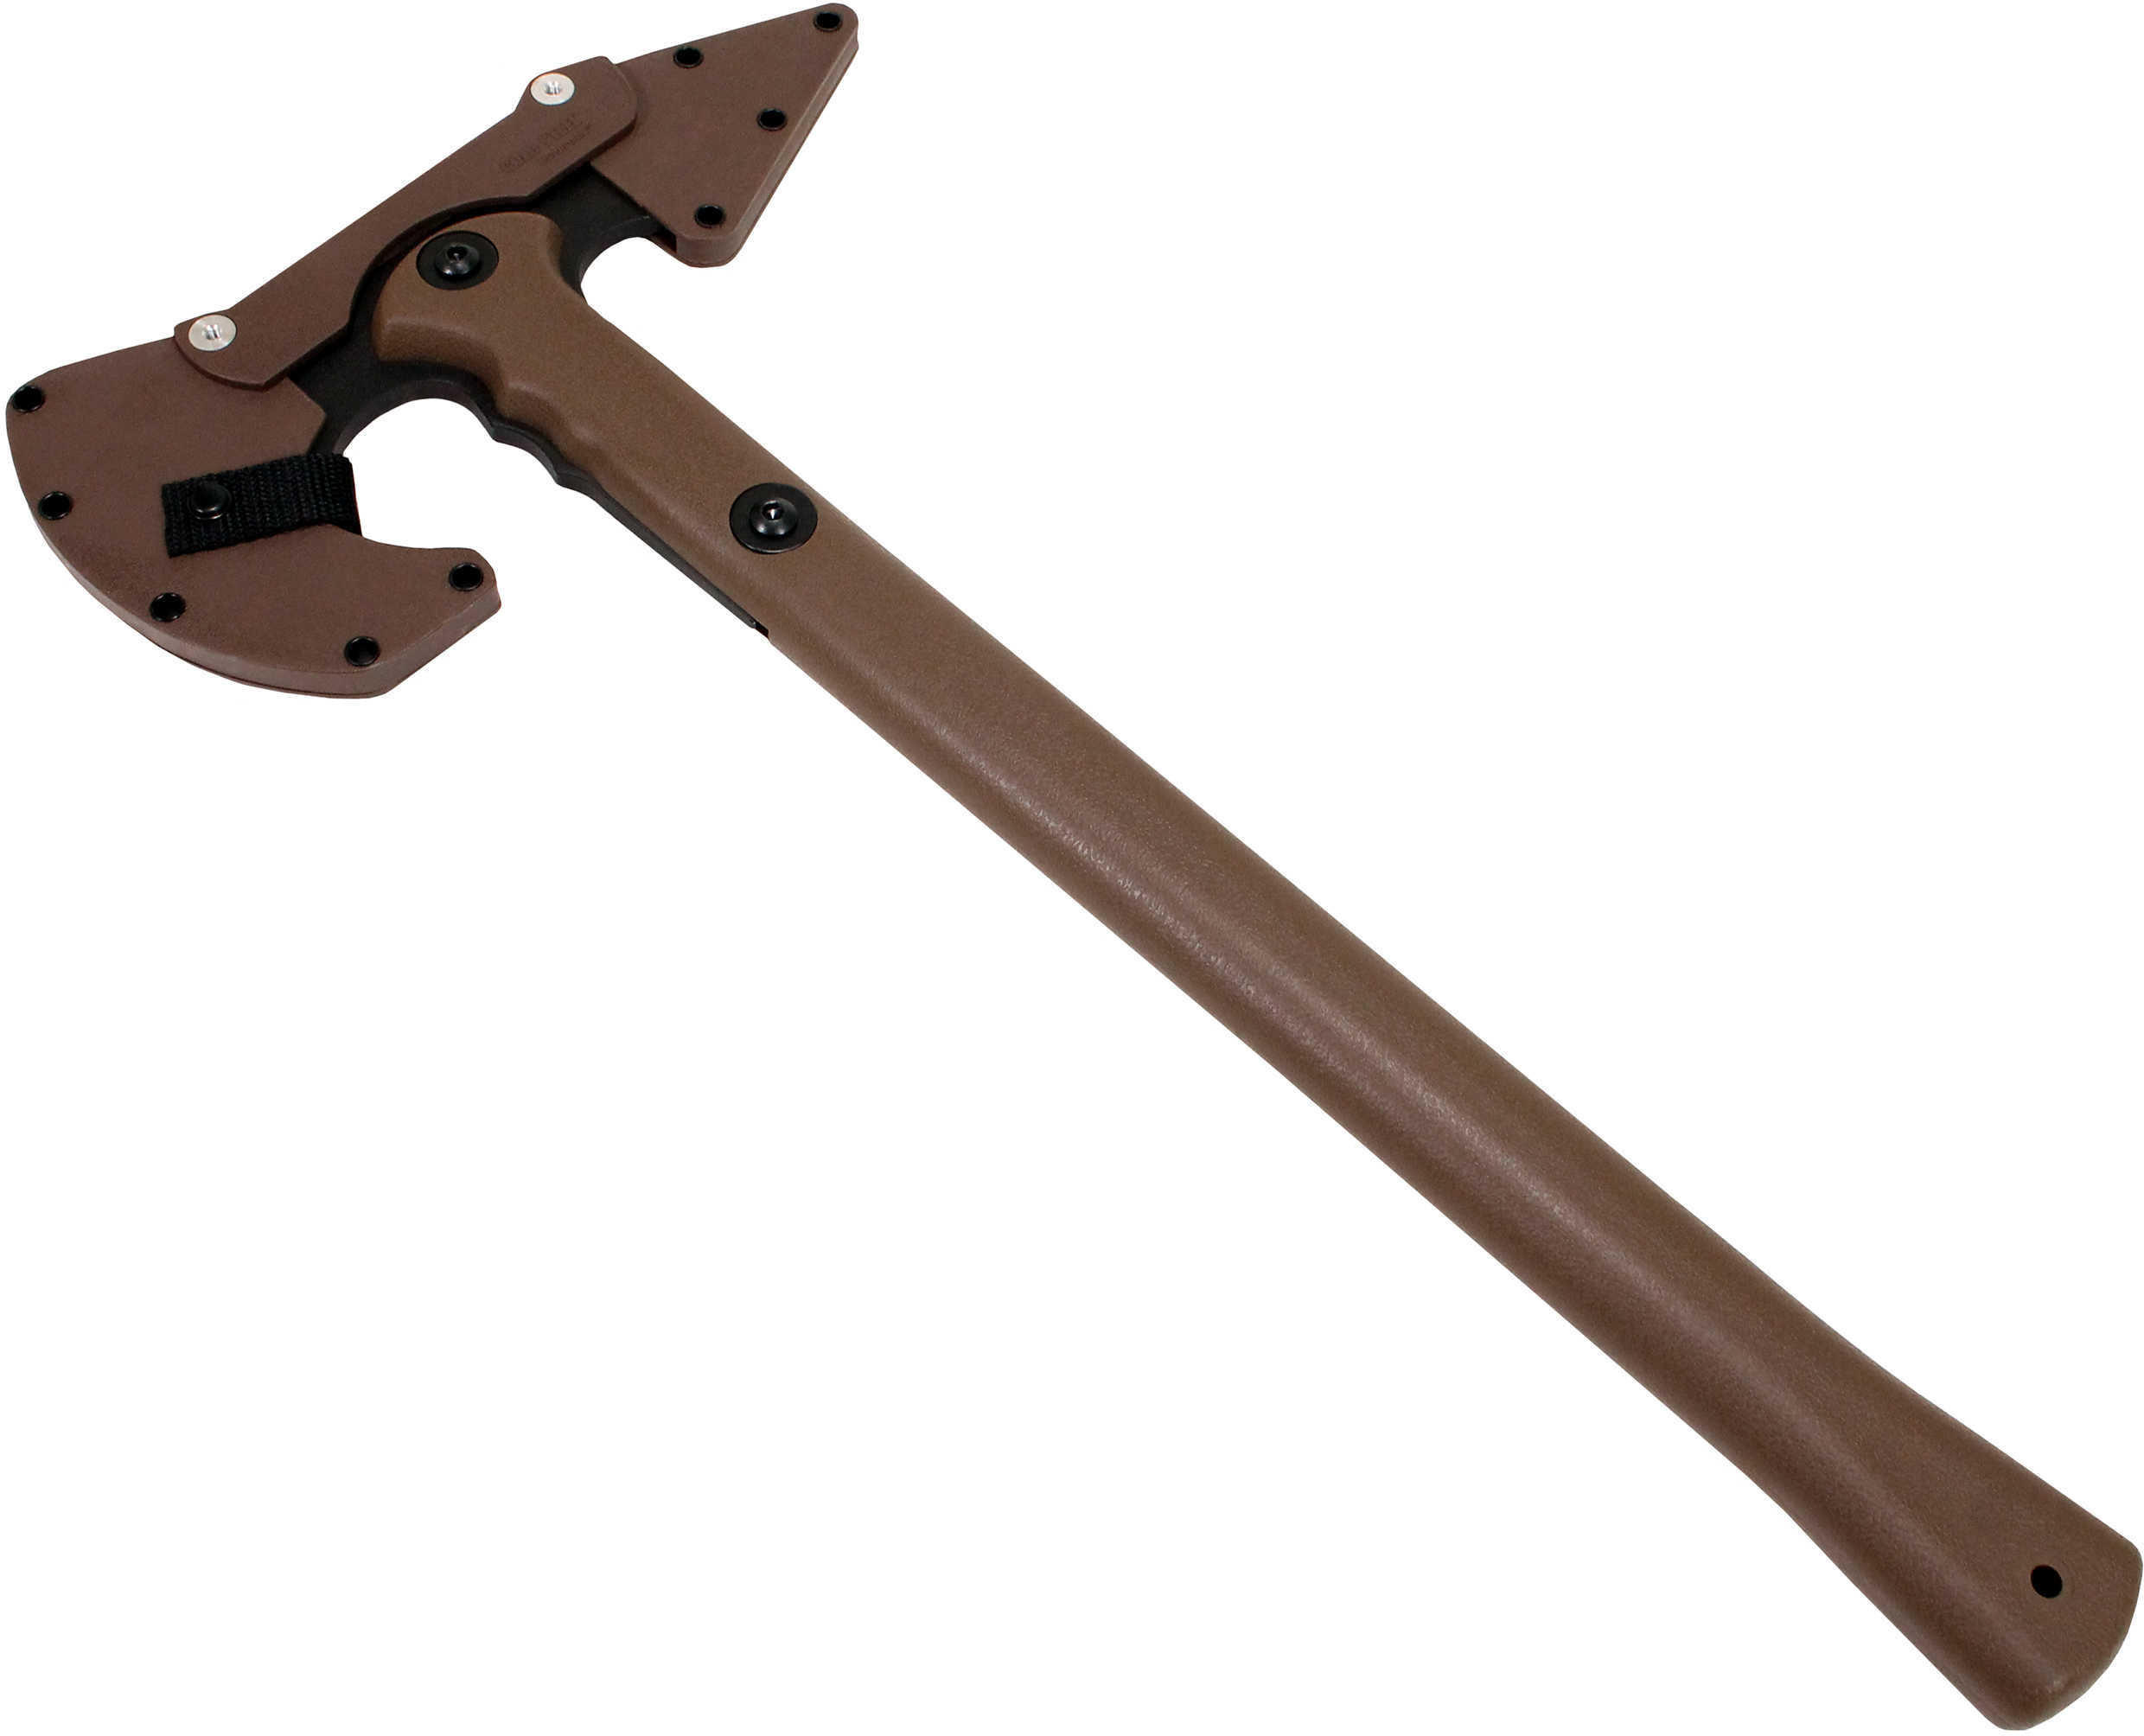 Cold Steel Trench Hawk Drop Forged Axe 8.75 in Head FDE Handle